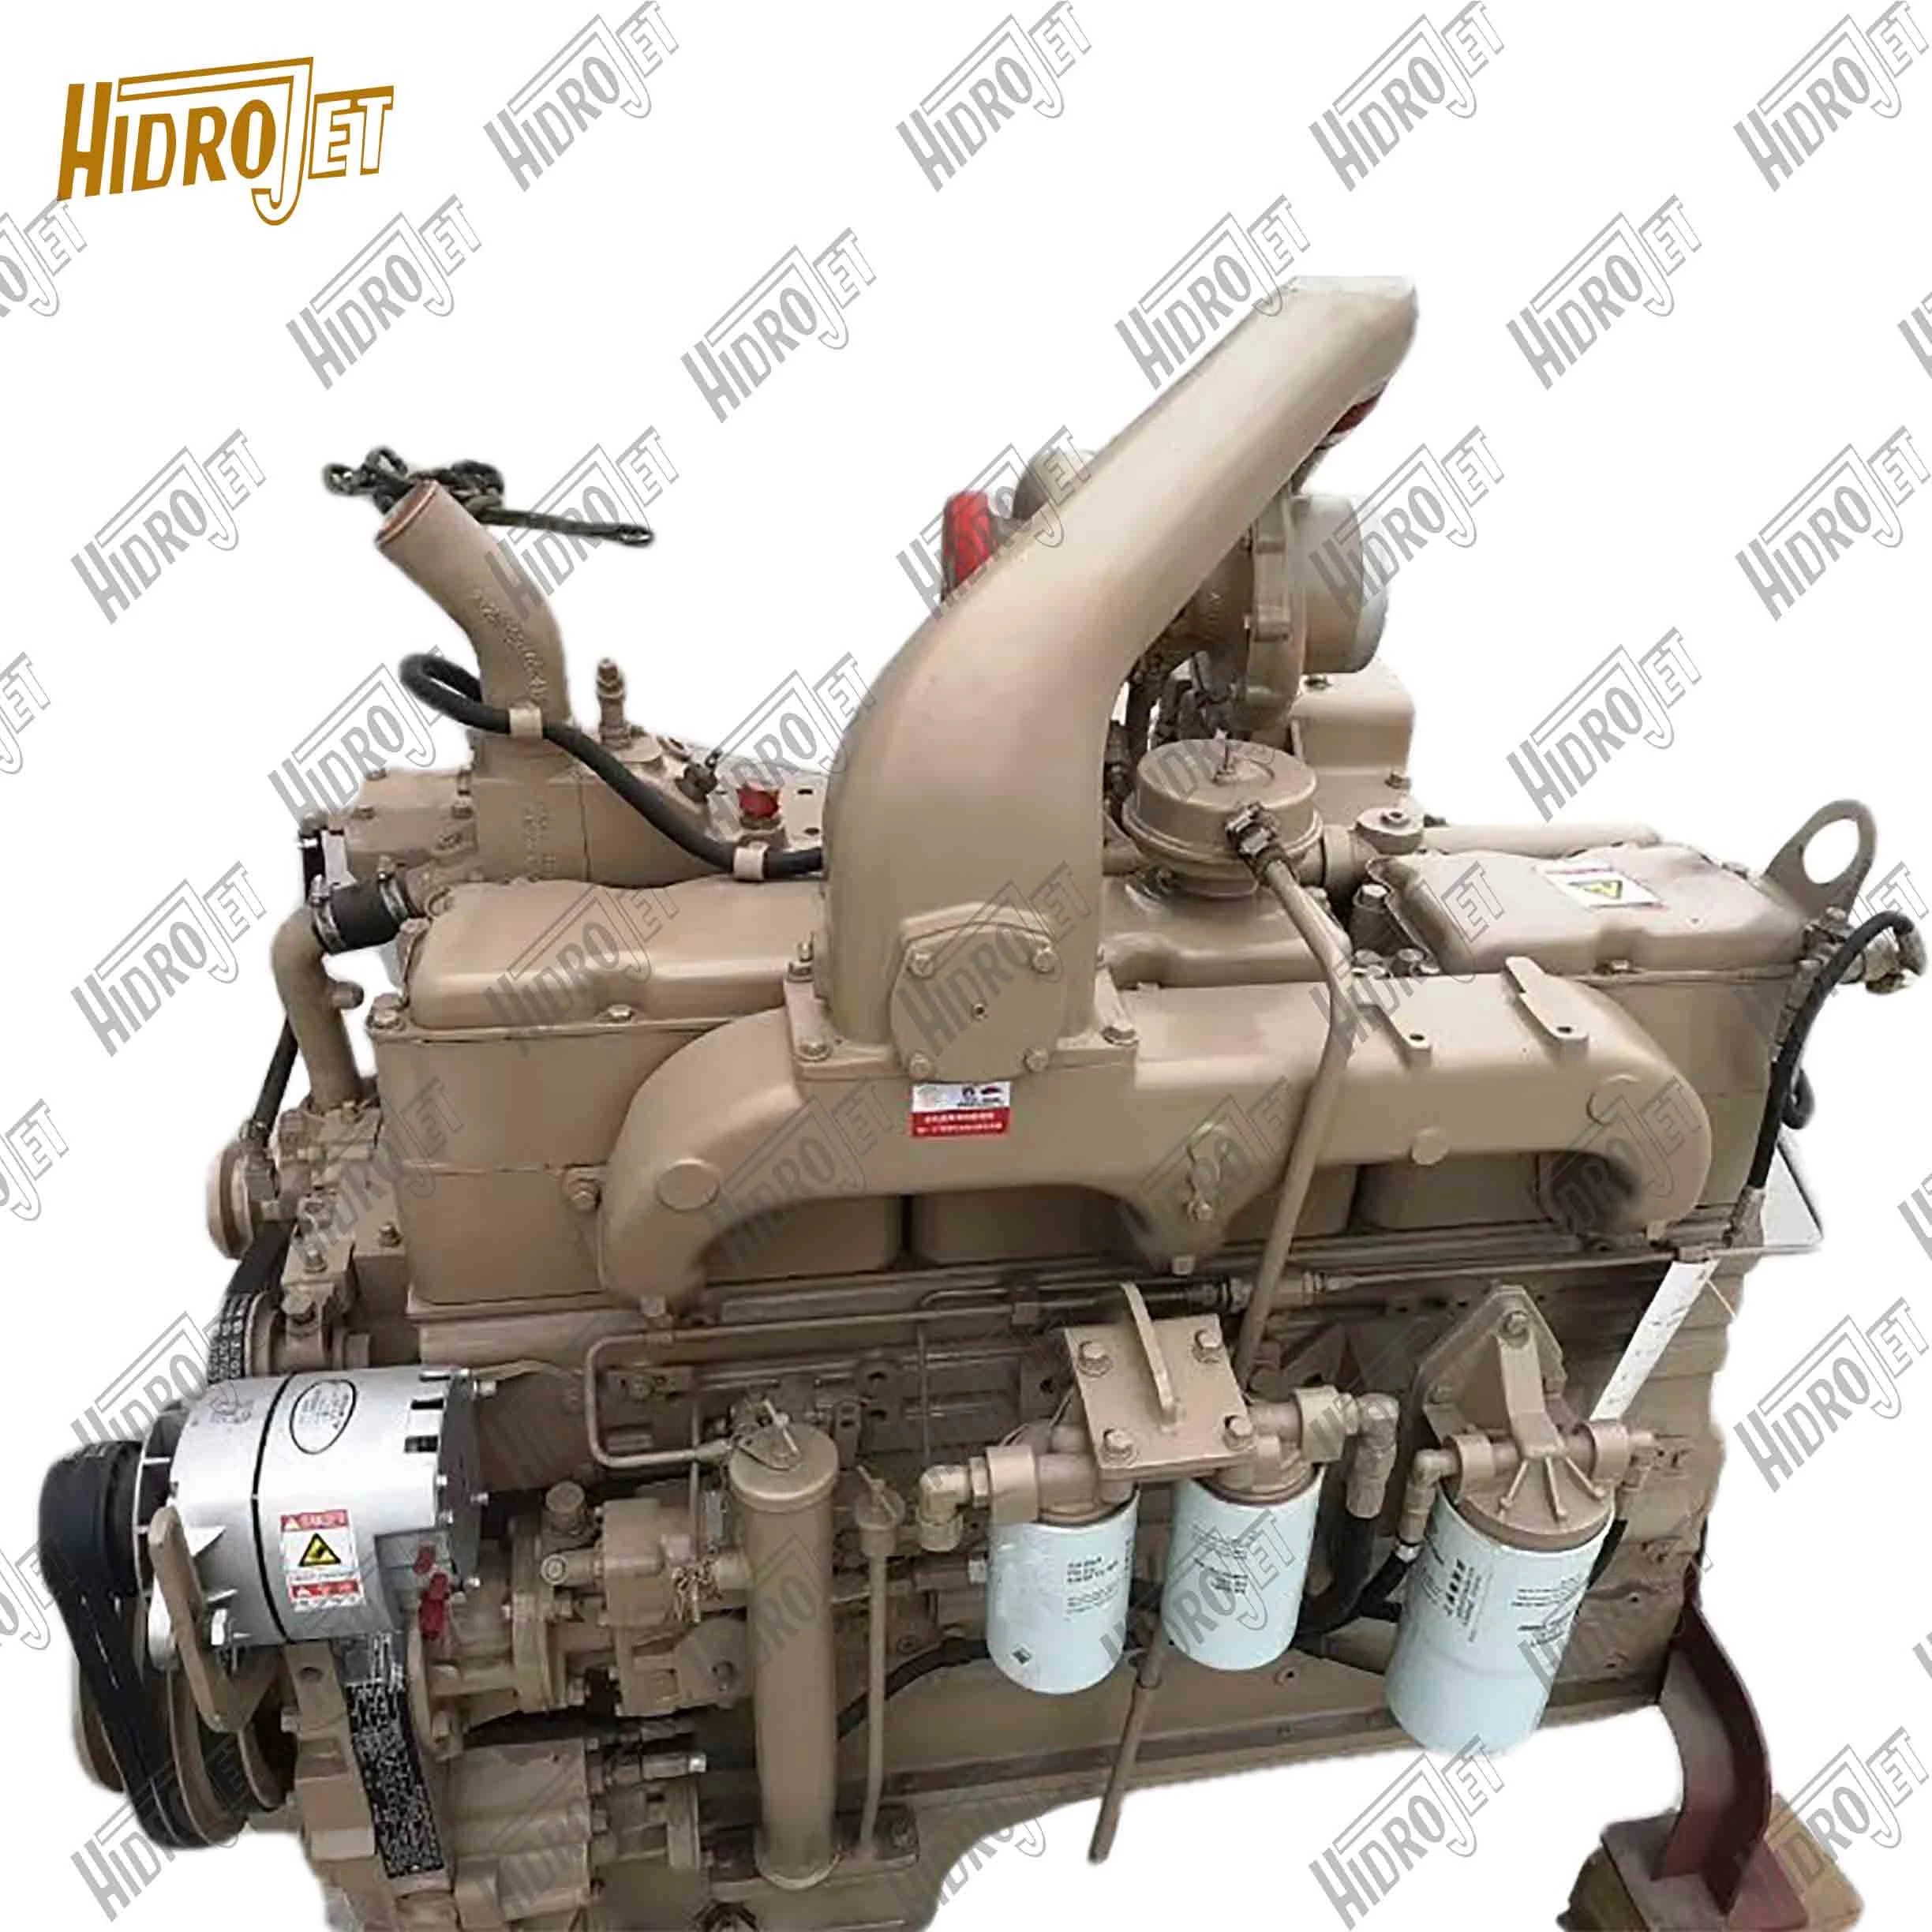 NEW original SD22 SD23 SD32 Completely Engine NTA855-C280 with Genuine Parts Diesel Engine for Bulldozer/ Vehicle/ Truck